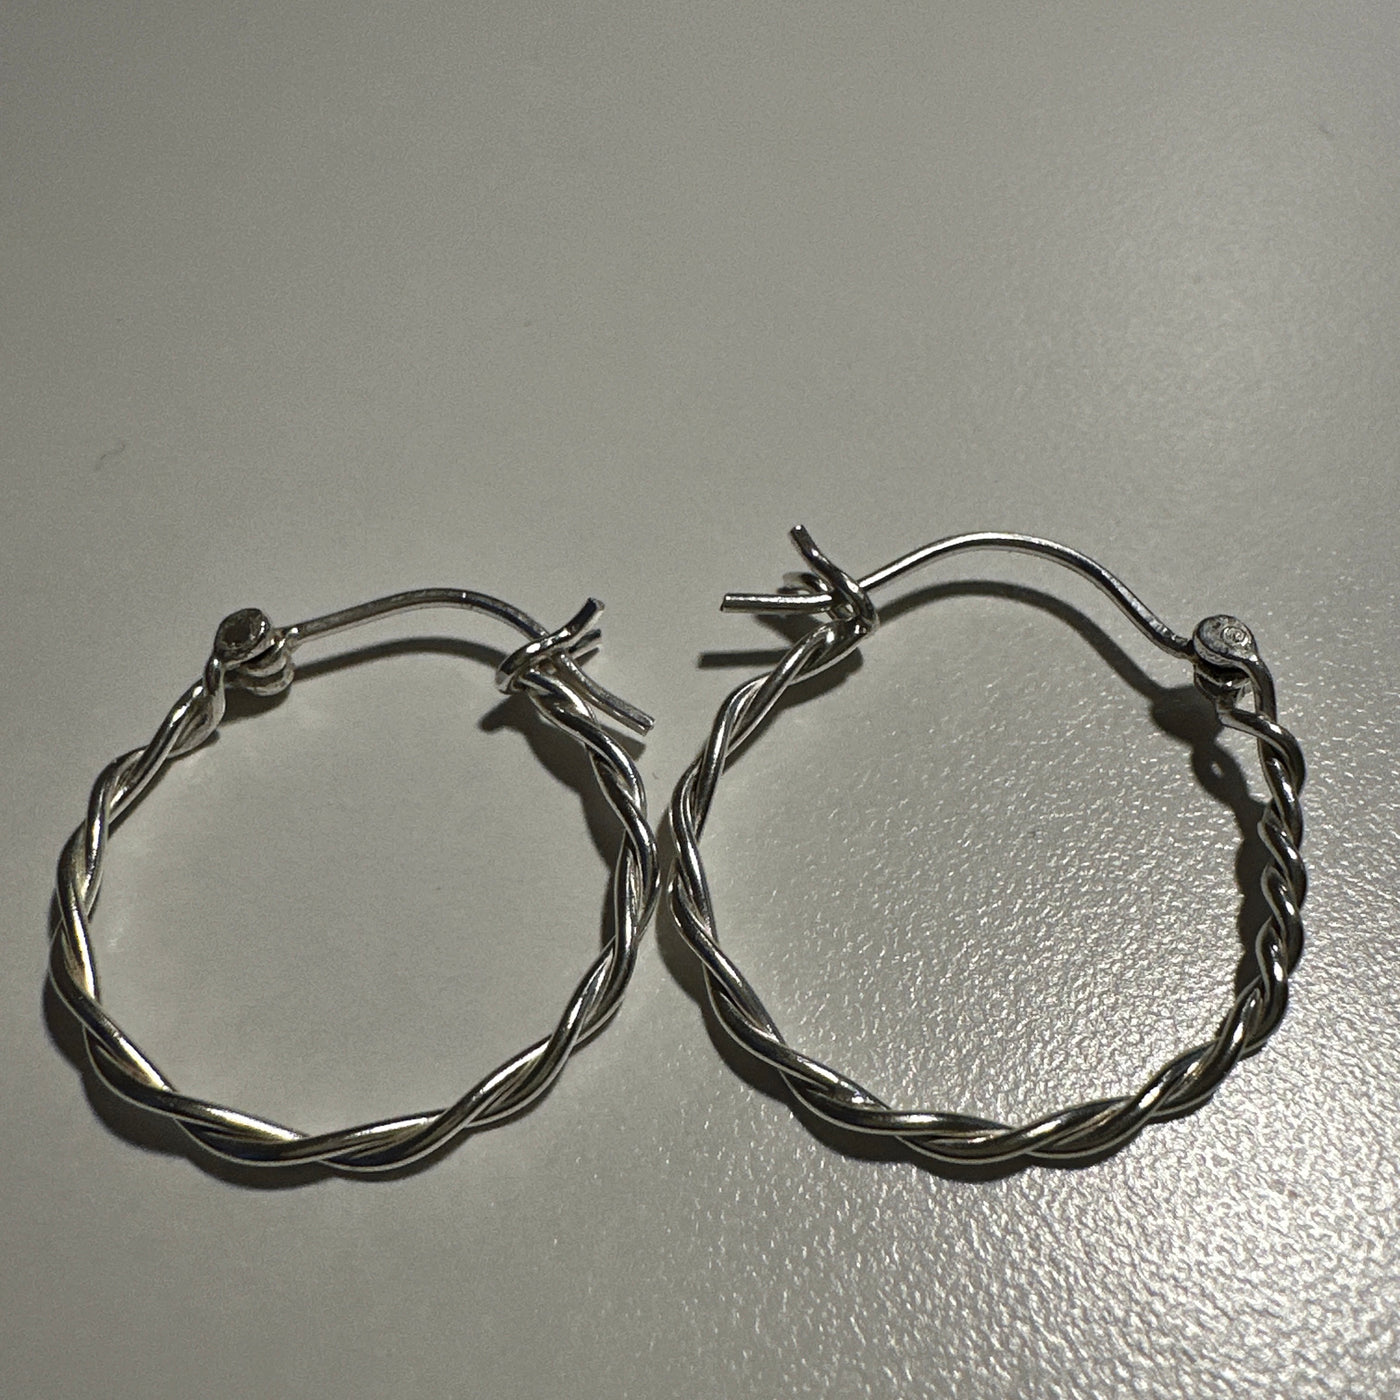 Twisted round earrings. Silver